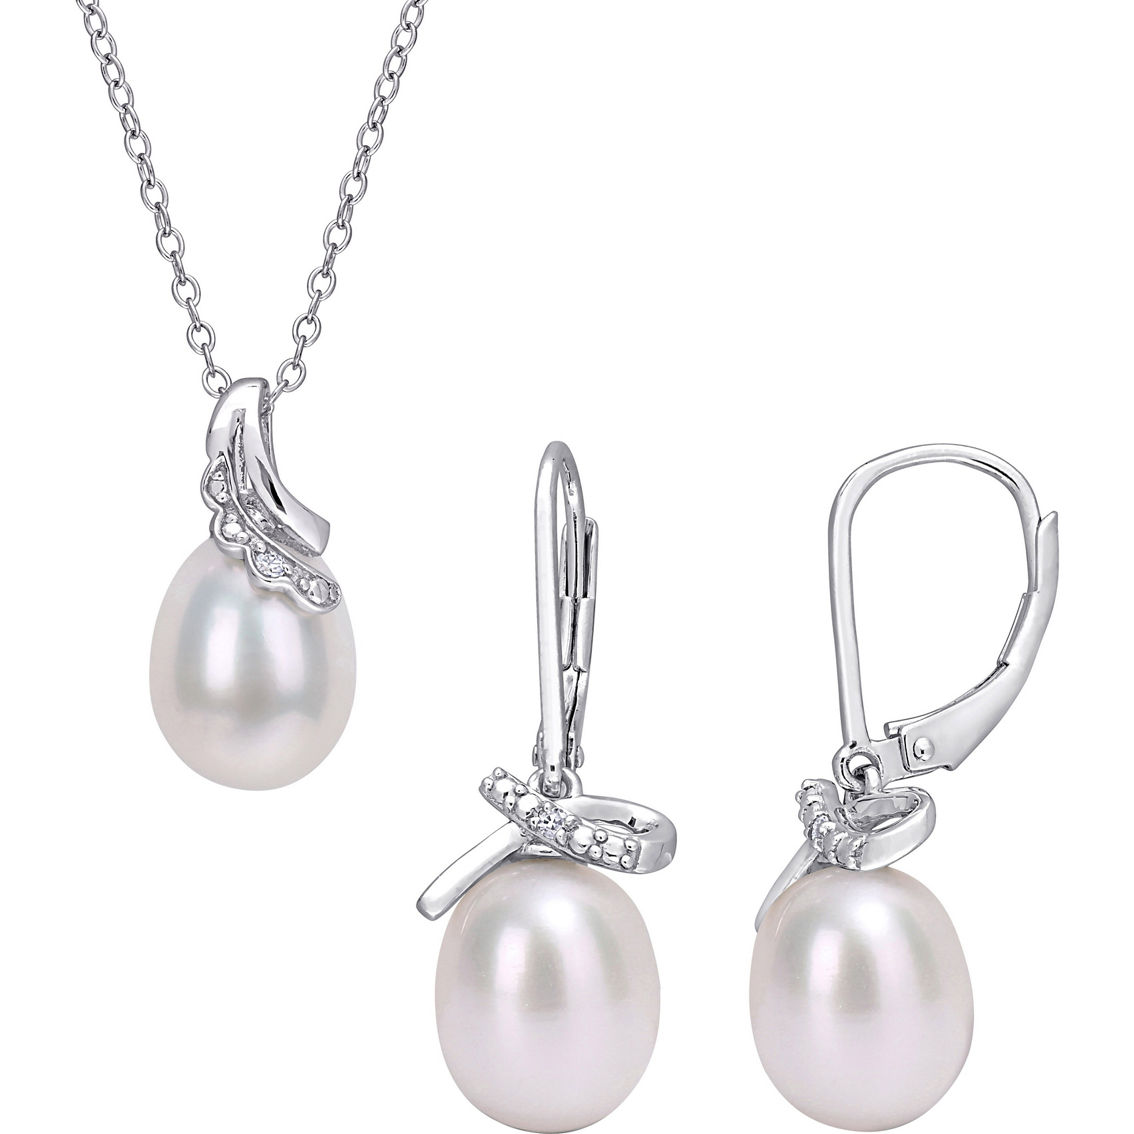 Sofia B. Cultured Freshwater Pearl Diamond Accent Bow Earrings & Necklace 2 pc. Set - Image 1 of 3